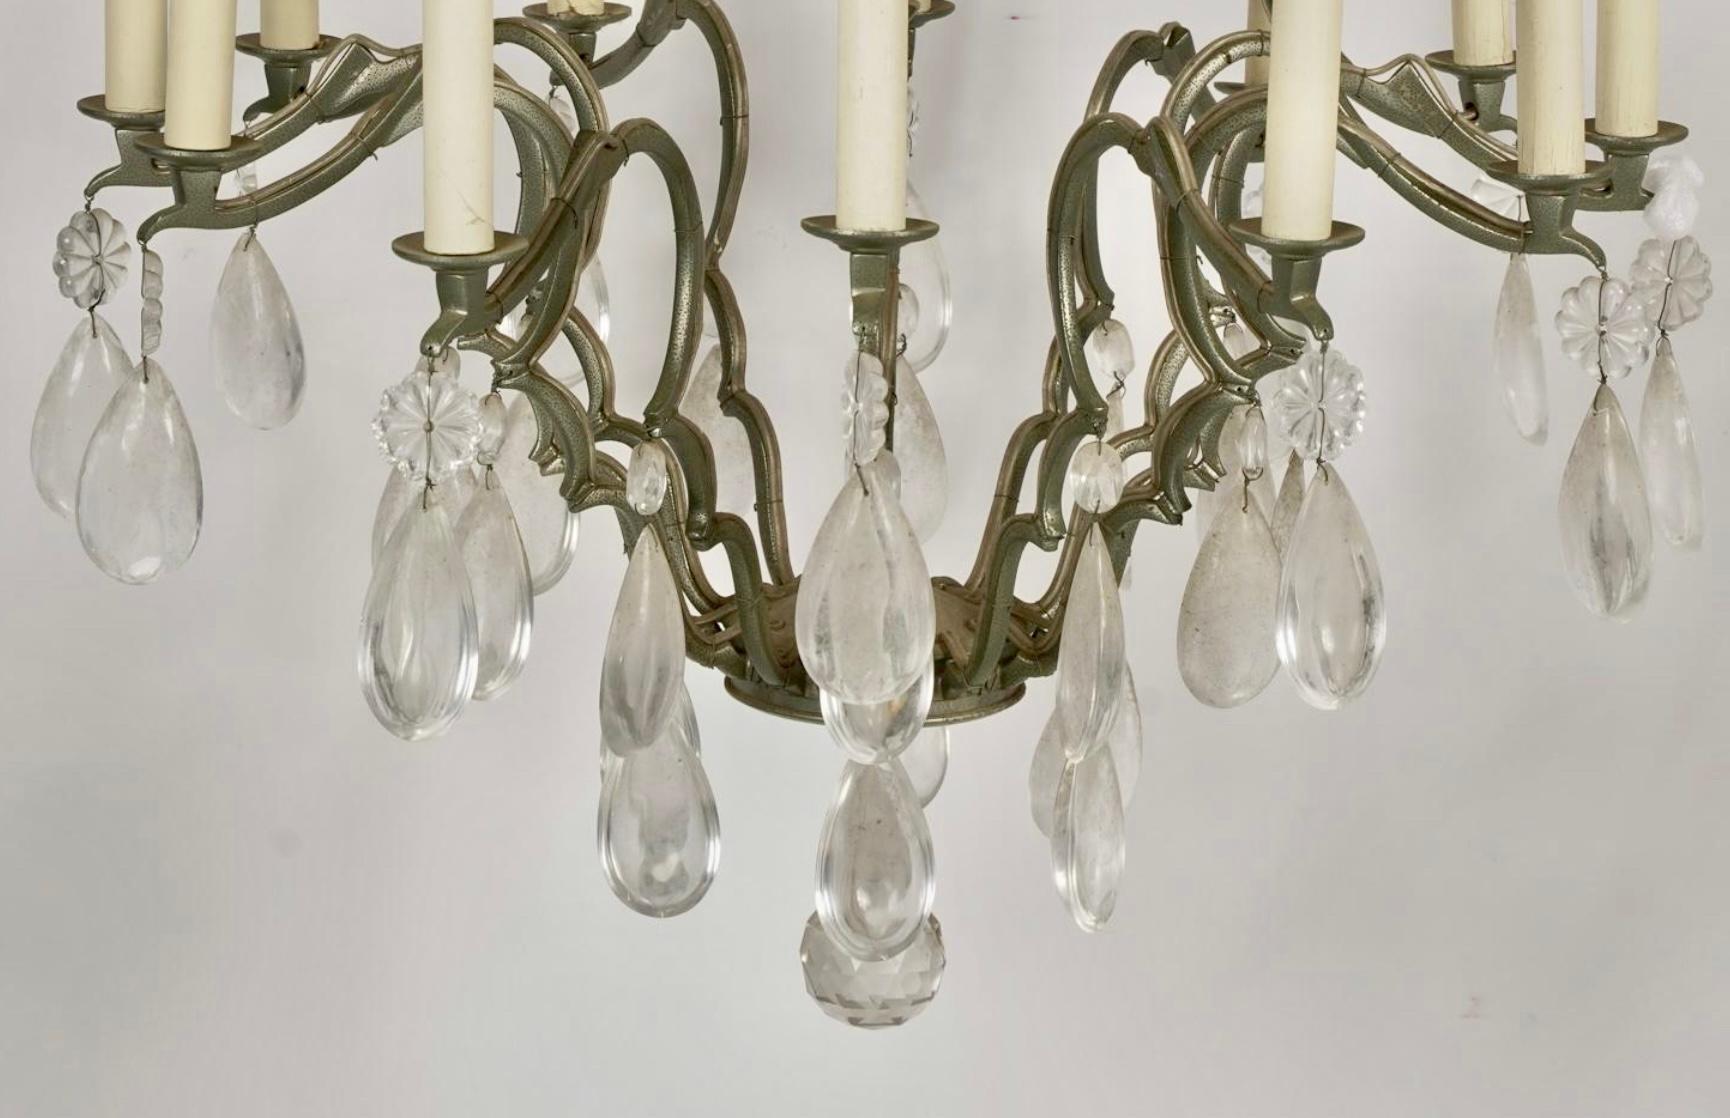 Pair of French Bronze Patinated Rock Crystal Chandeliers. Each features genuine rock crystals with a central orb supported by a bronze Patinated wrought iron frame.